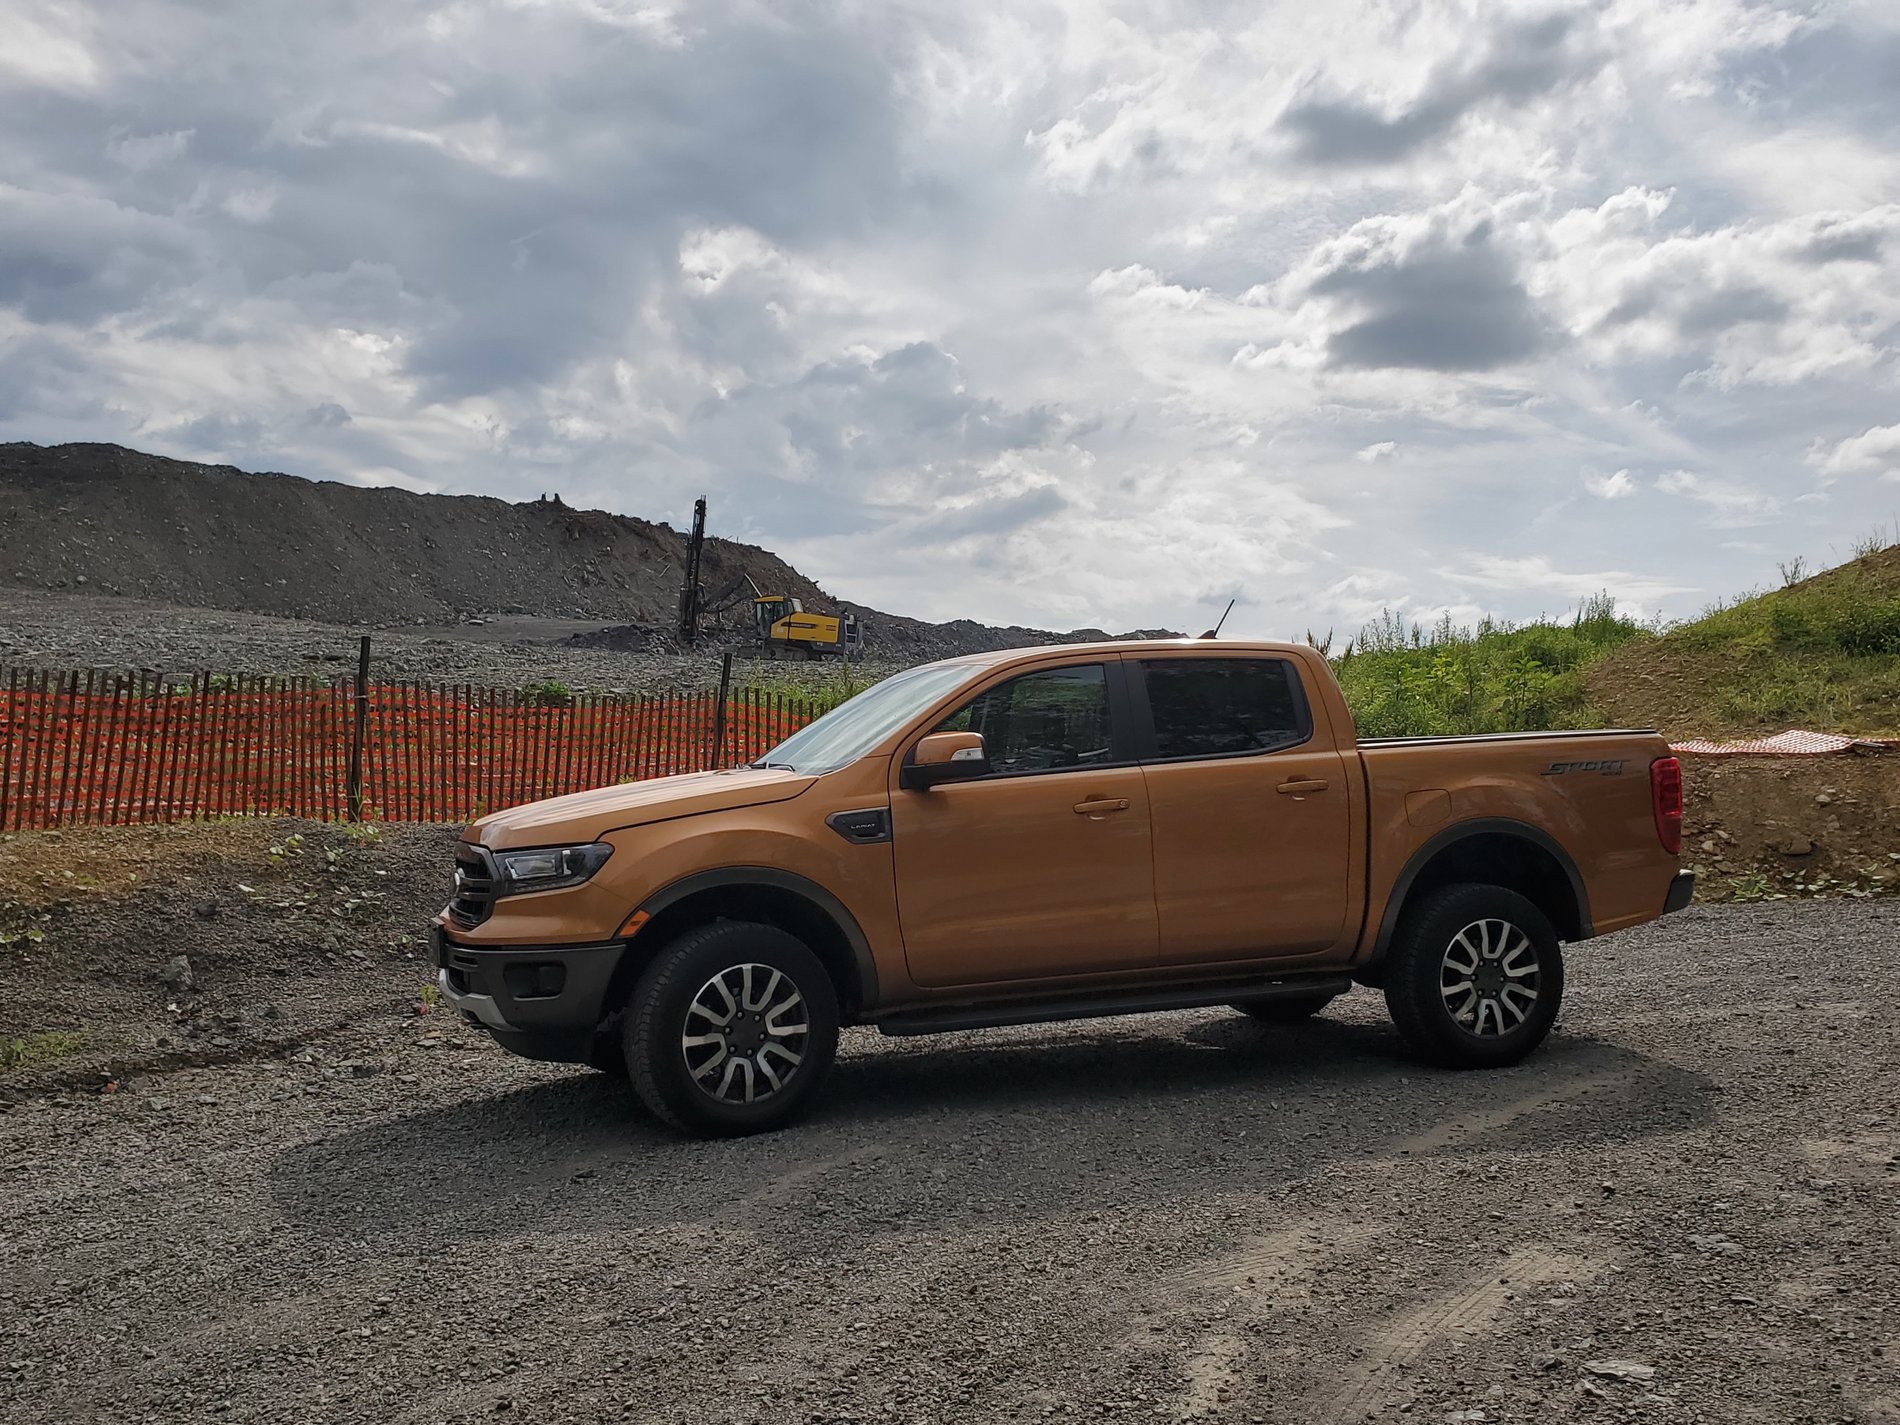 Ford Ranger Lets see your sport package trucks 20190609_164747